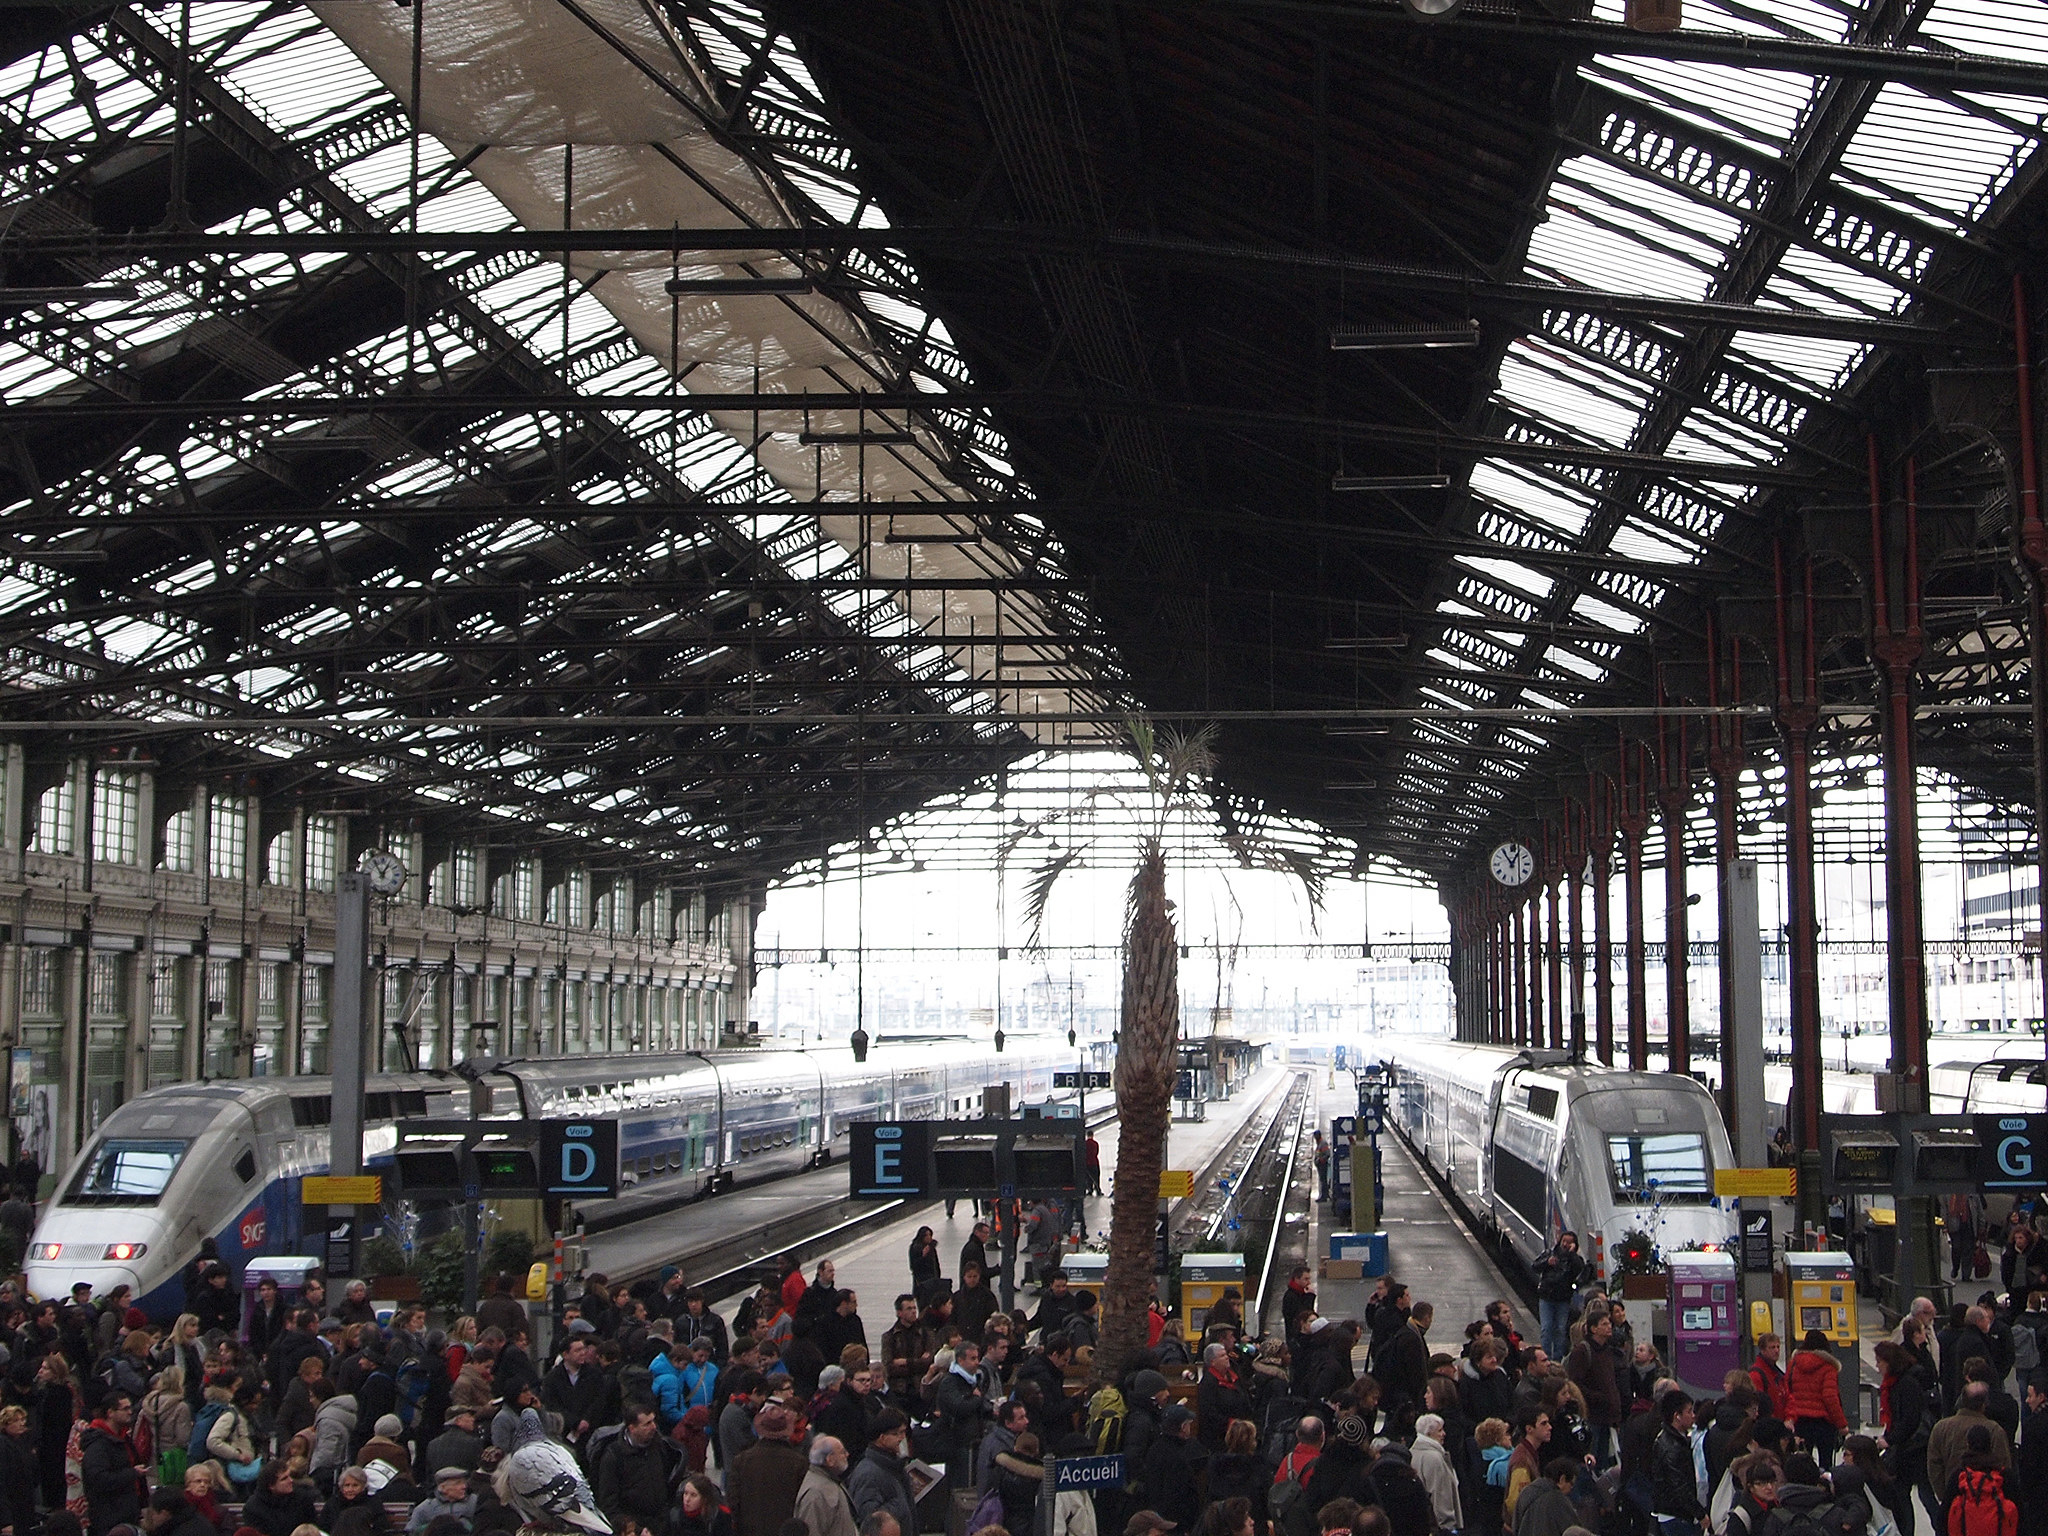 A large, busy train station